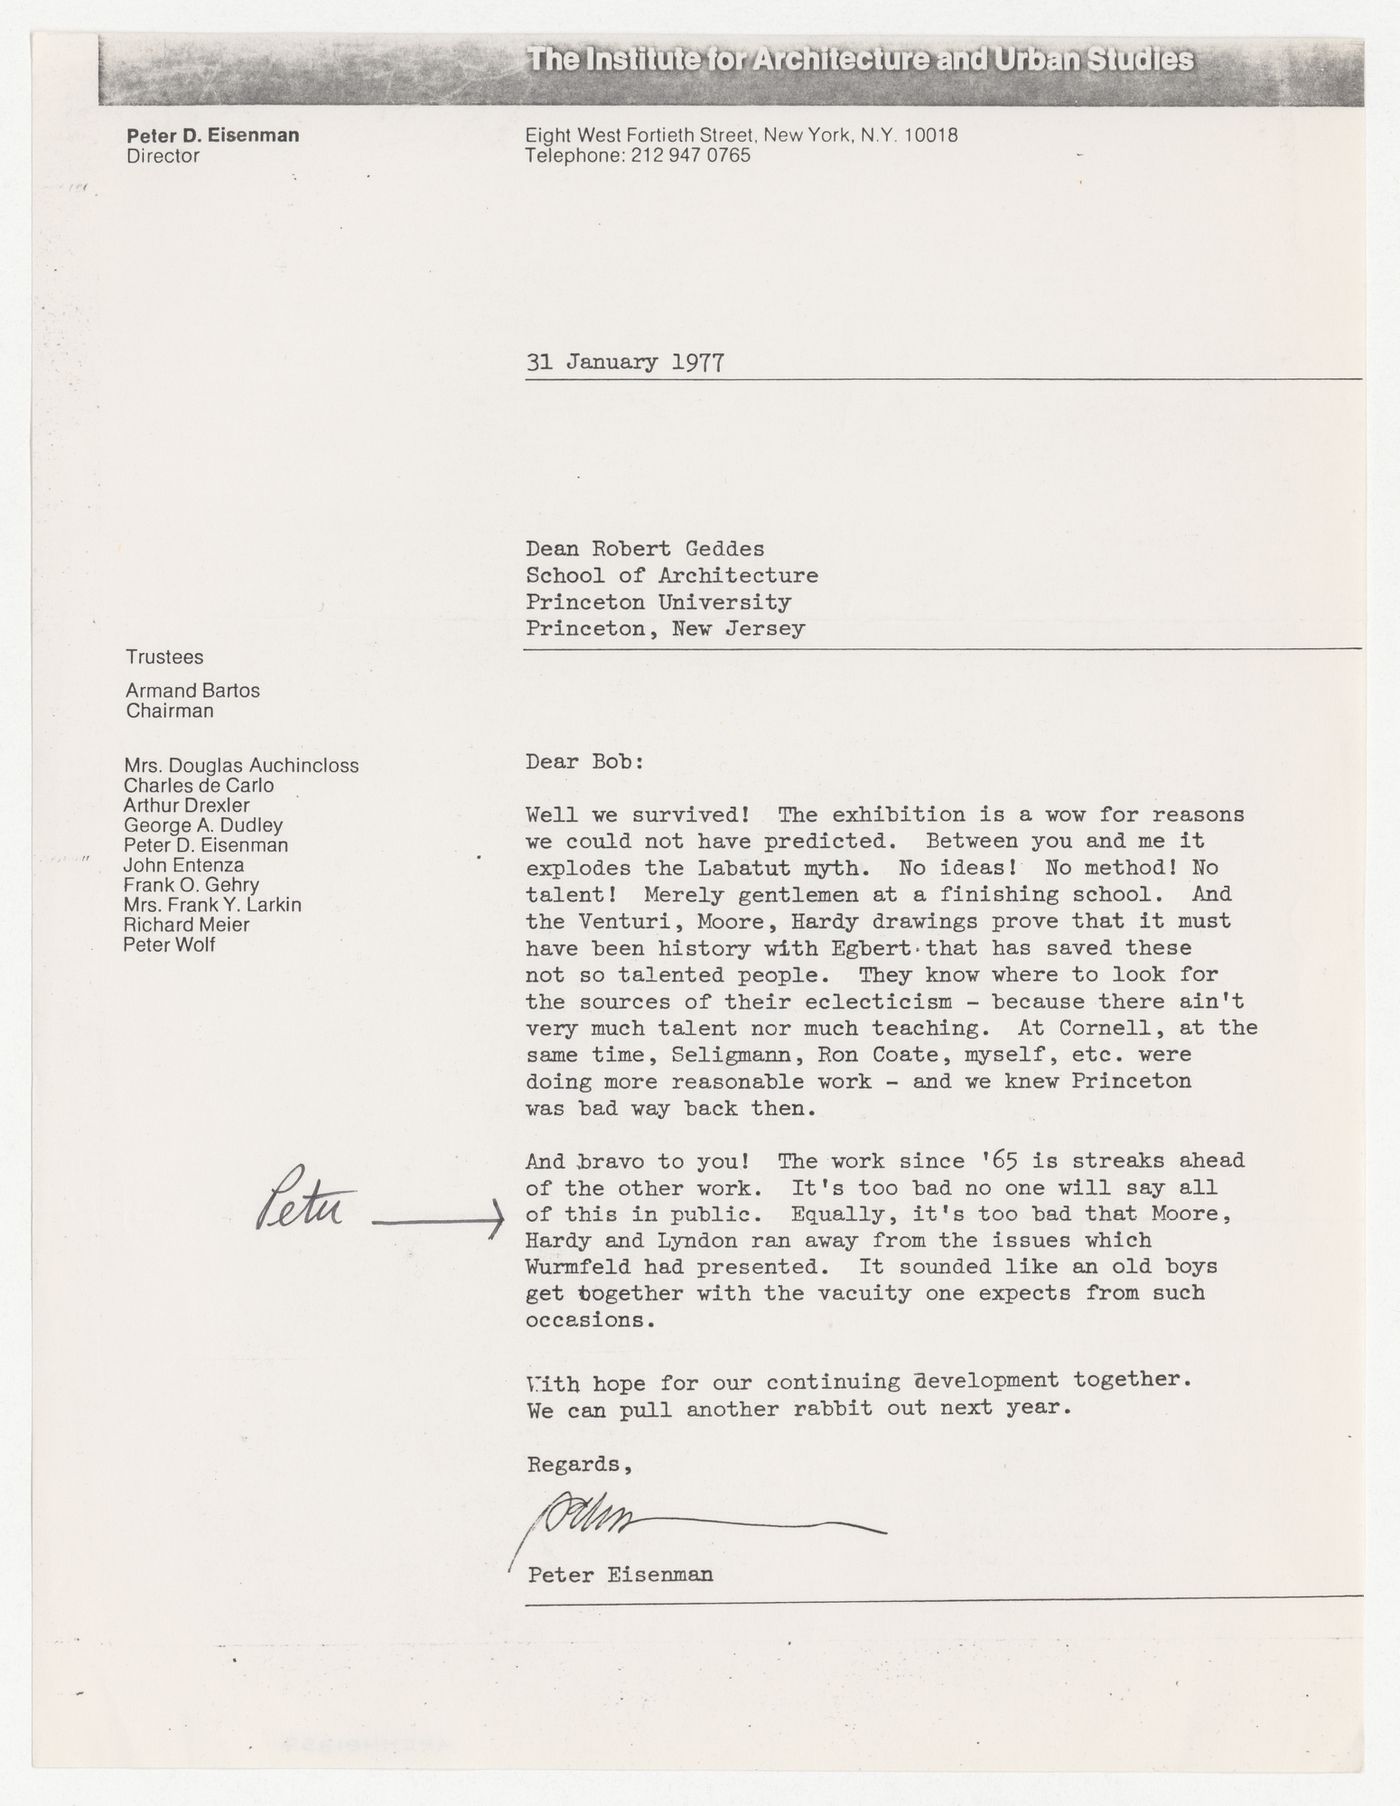 Letter from Peter D. Eisenman to Robert Geddes about an exhibition